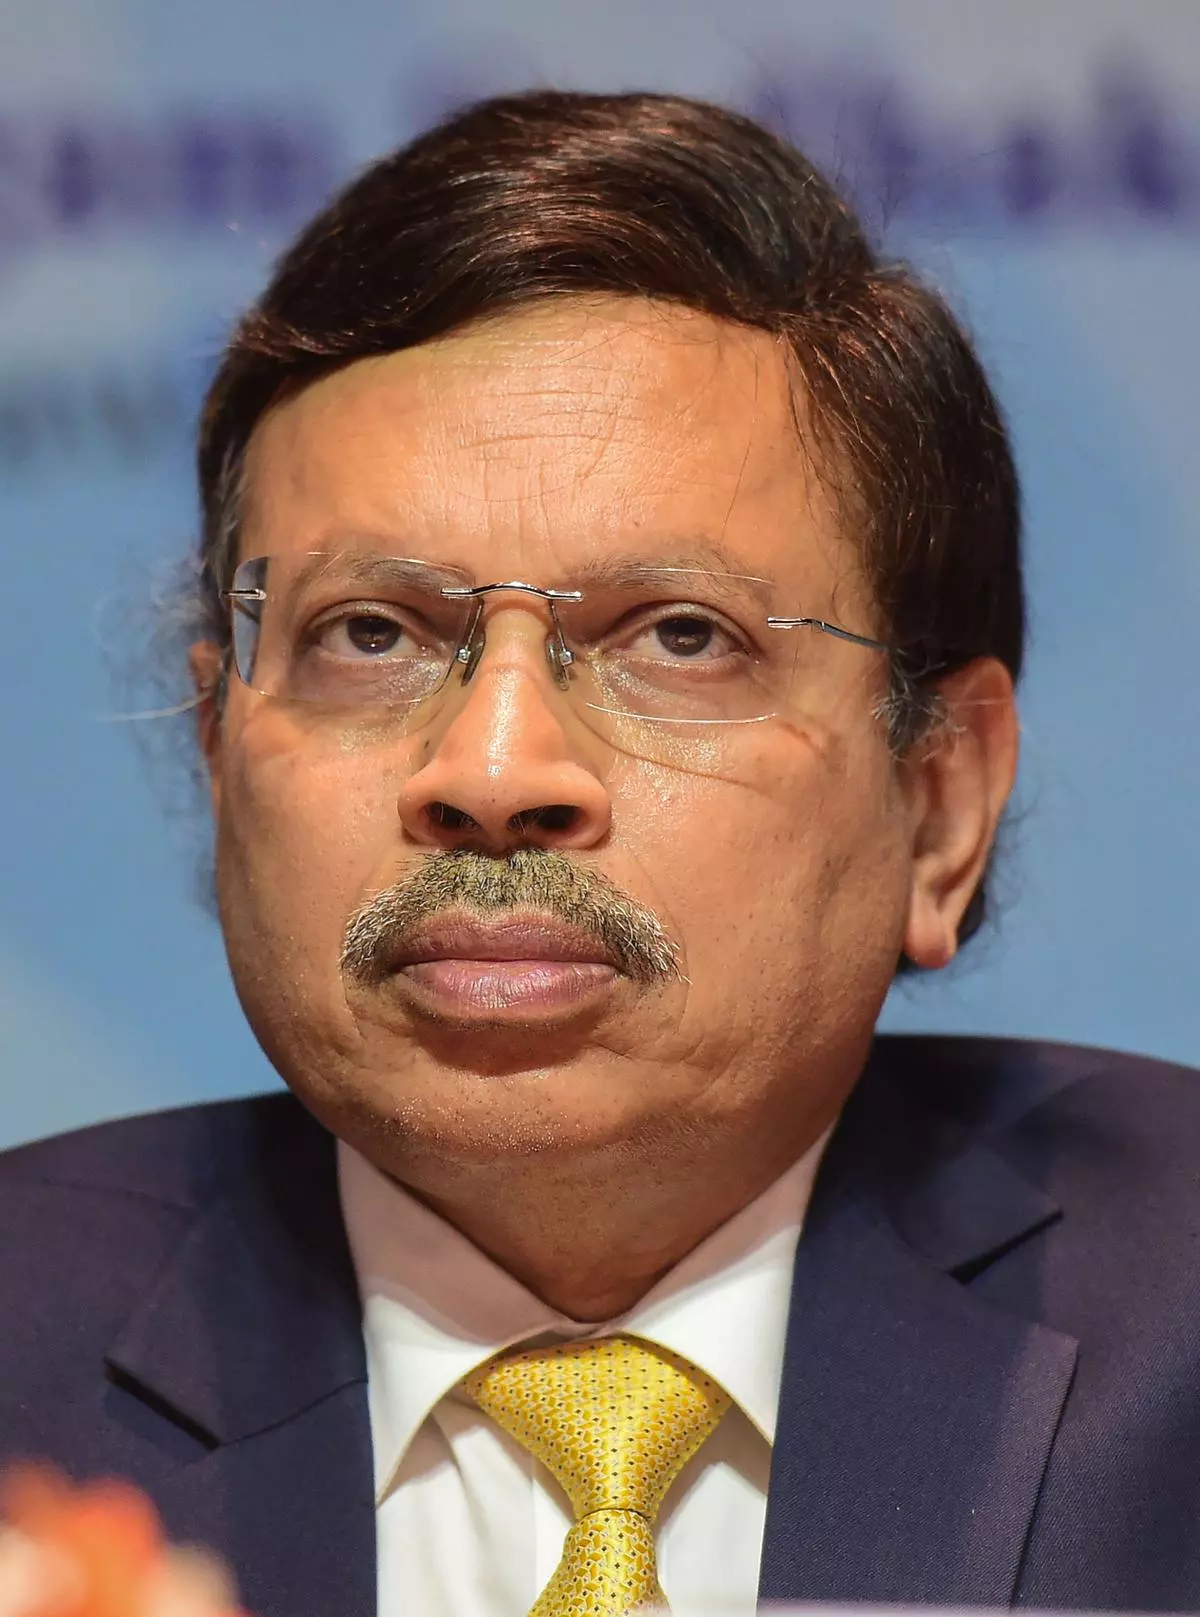 Ashok Kumar Gupta, Chairperson of Competition Commission of India during the 6th Foundation Day celebrations of Insolvency & Bankruptcy Board of India (IBBI) in New Delhi, Saturday, October 1, 2022.  